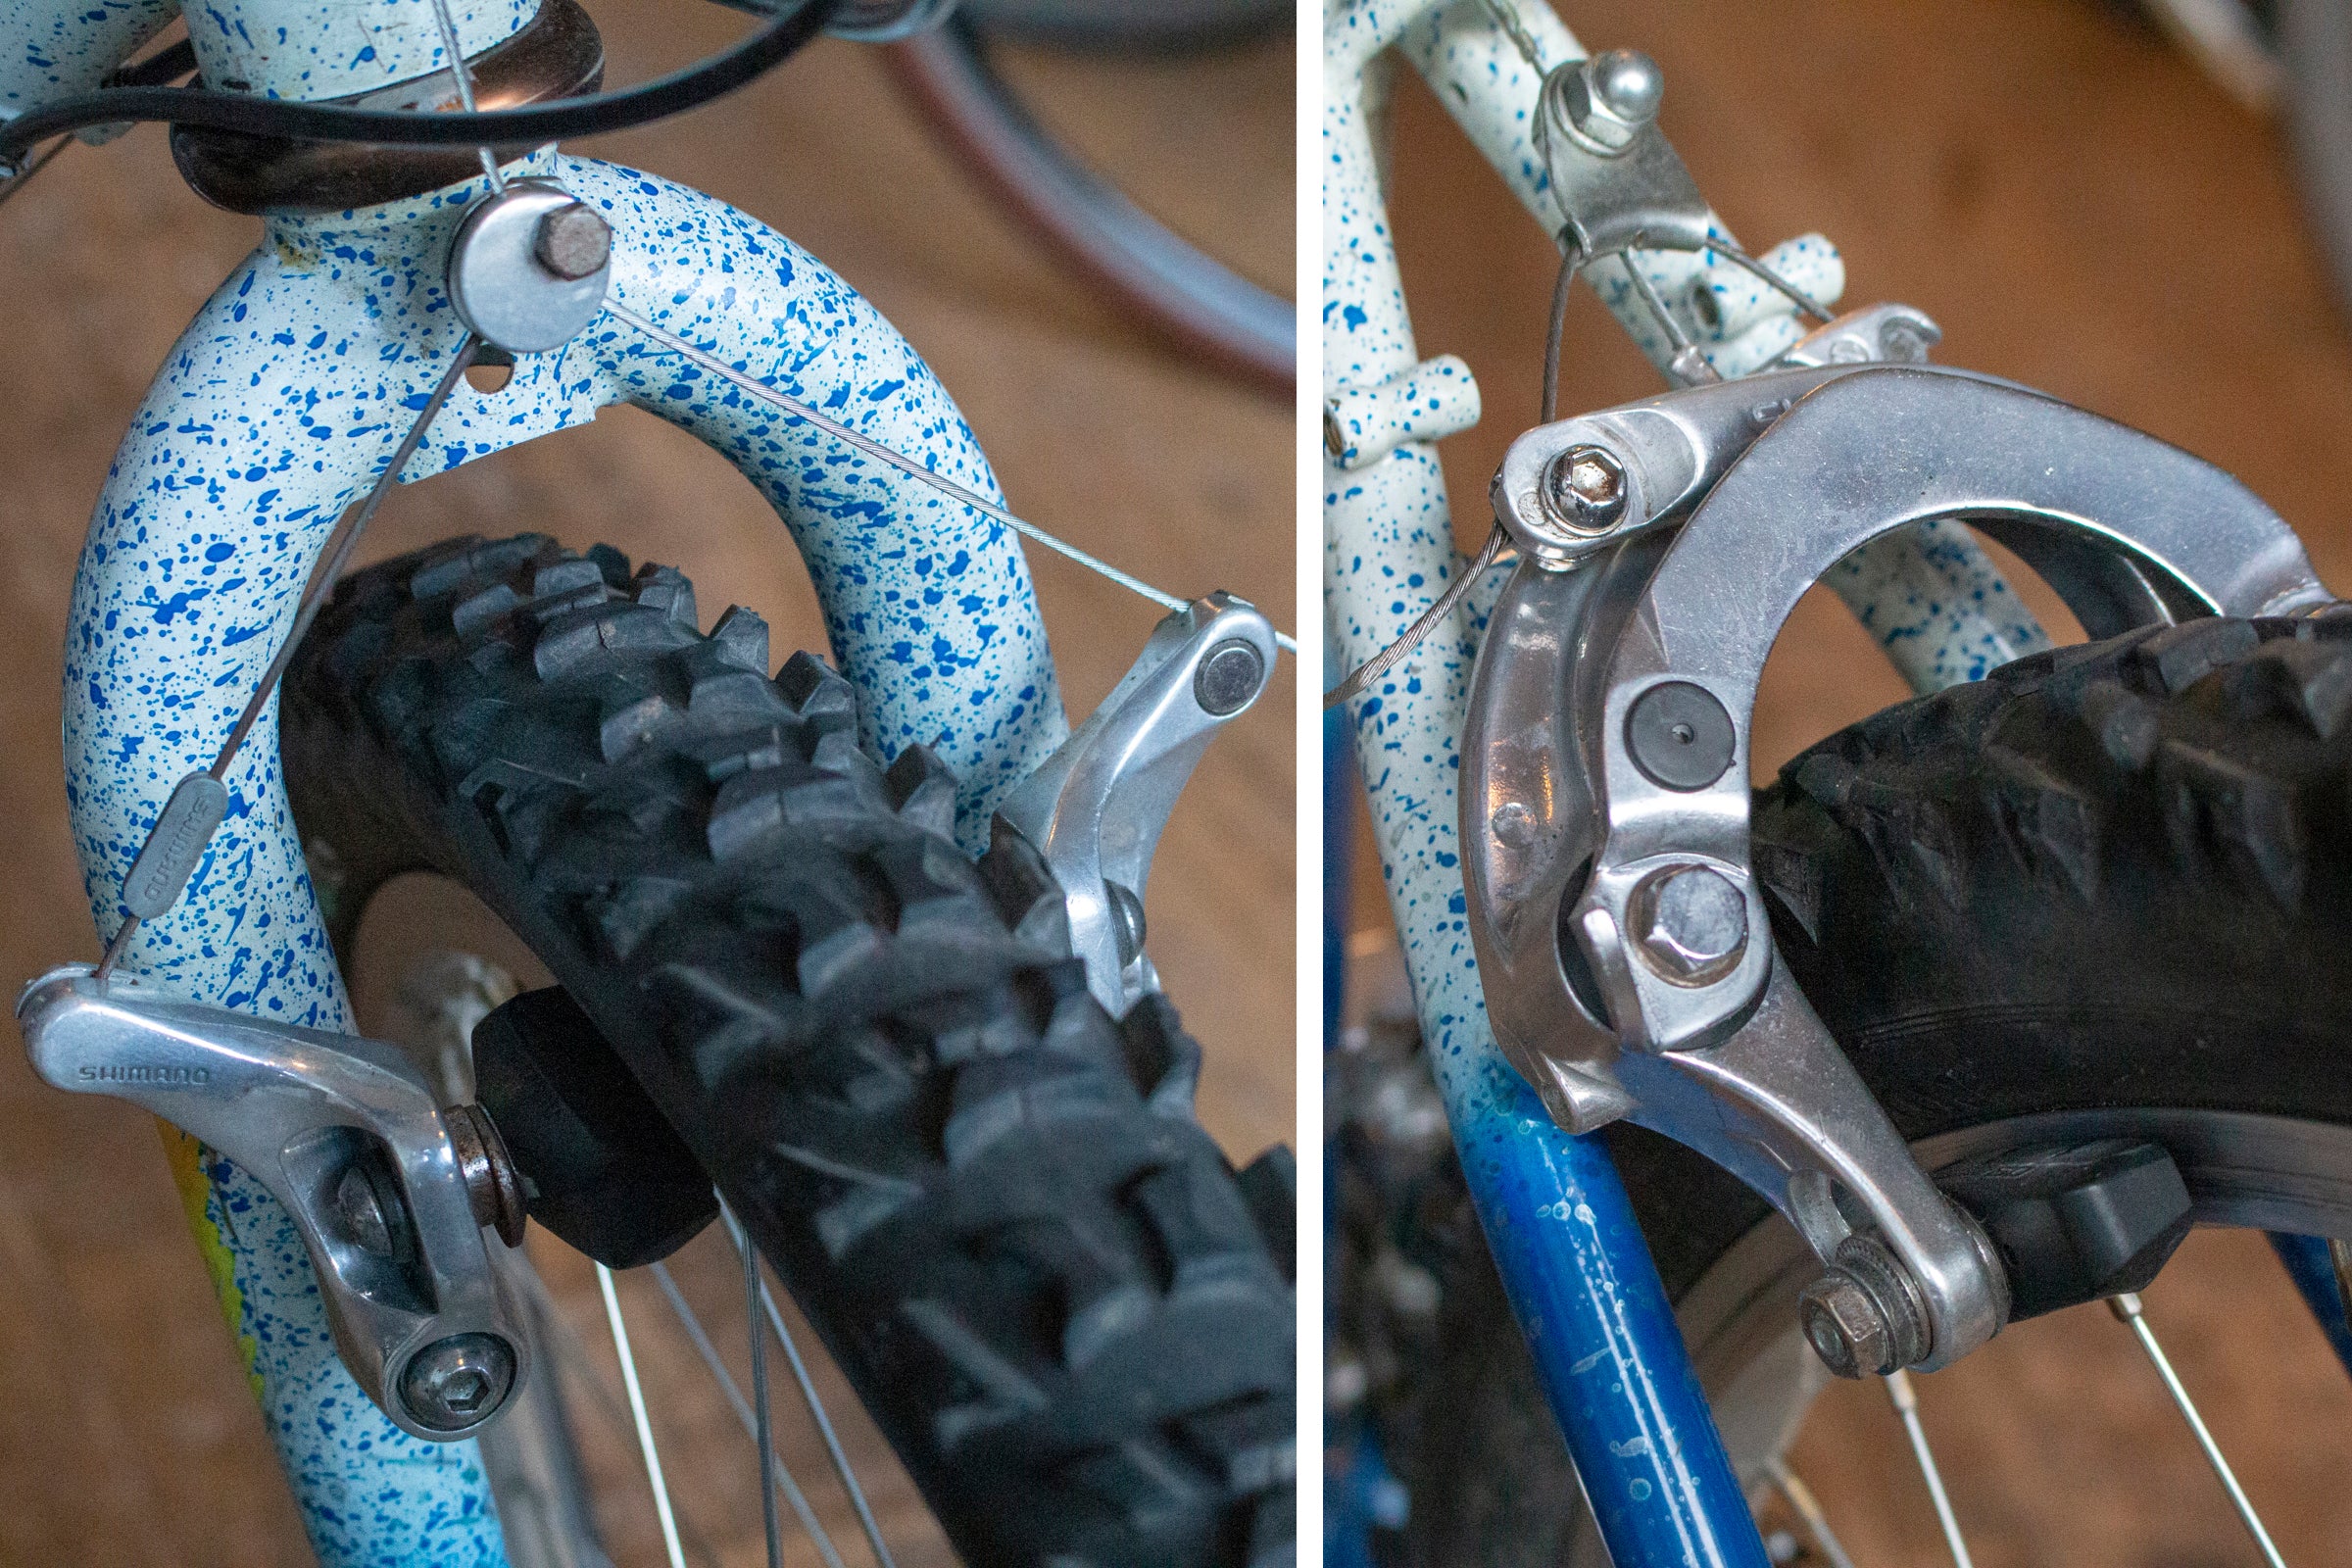 How to get the right brakes - Cantilever and U-Brake - Pedal Pedlar Classic & Vintage Cycling